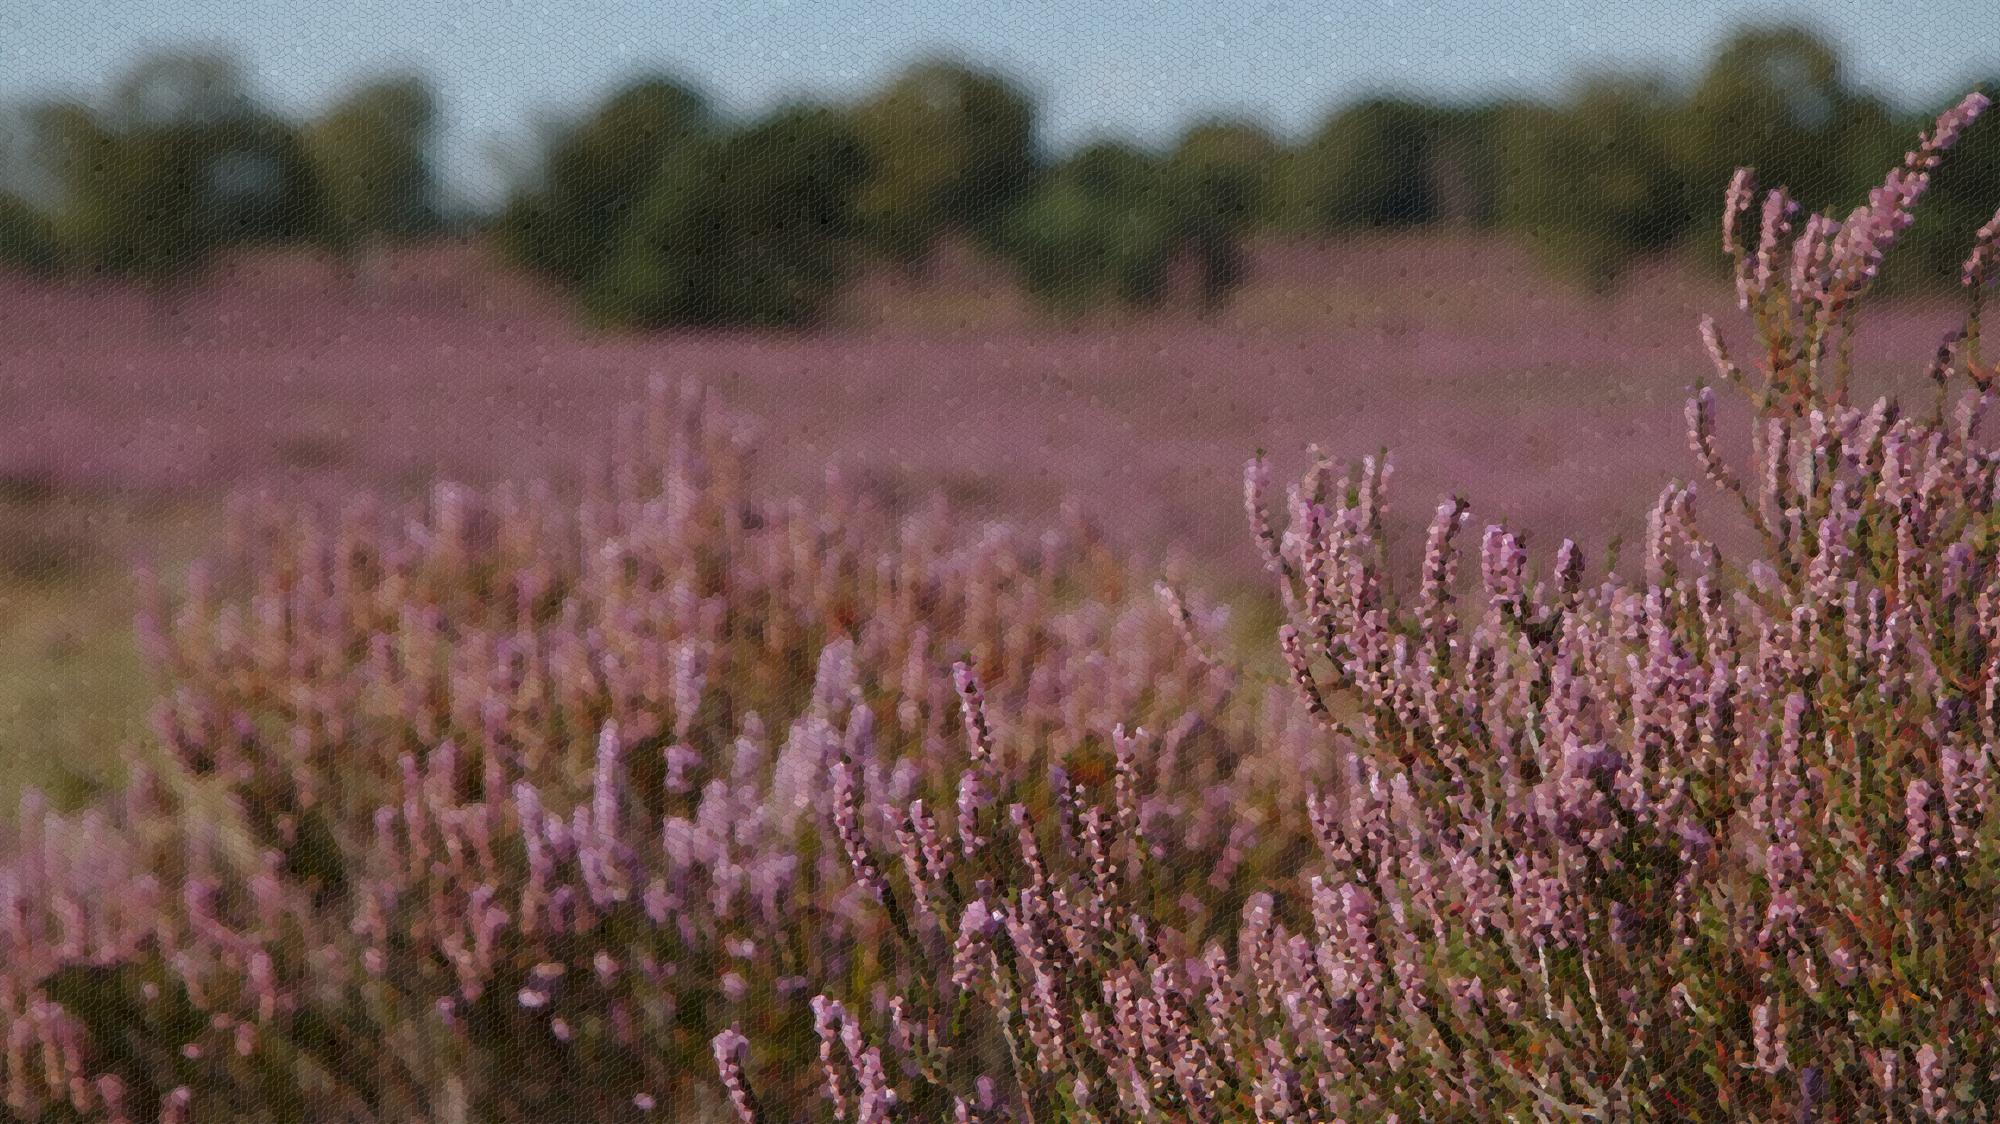 Photo of heathland with a mosaic effect applied with Gimp